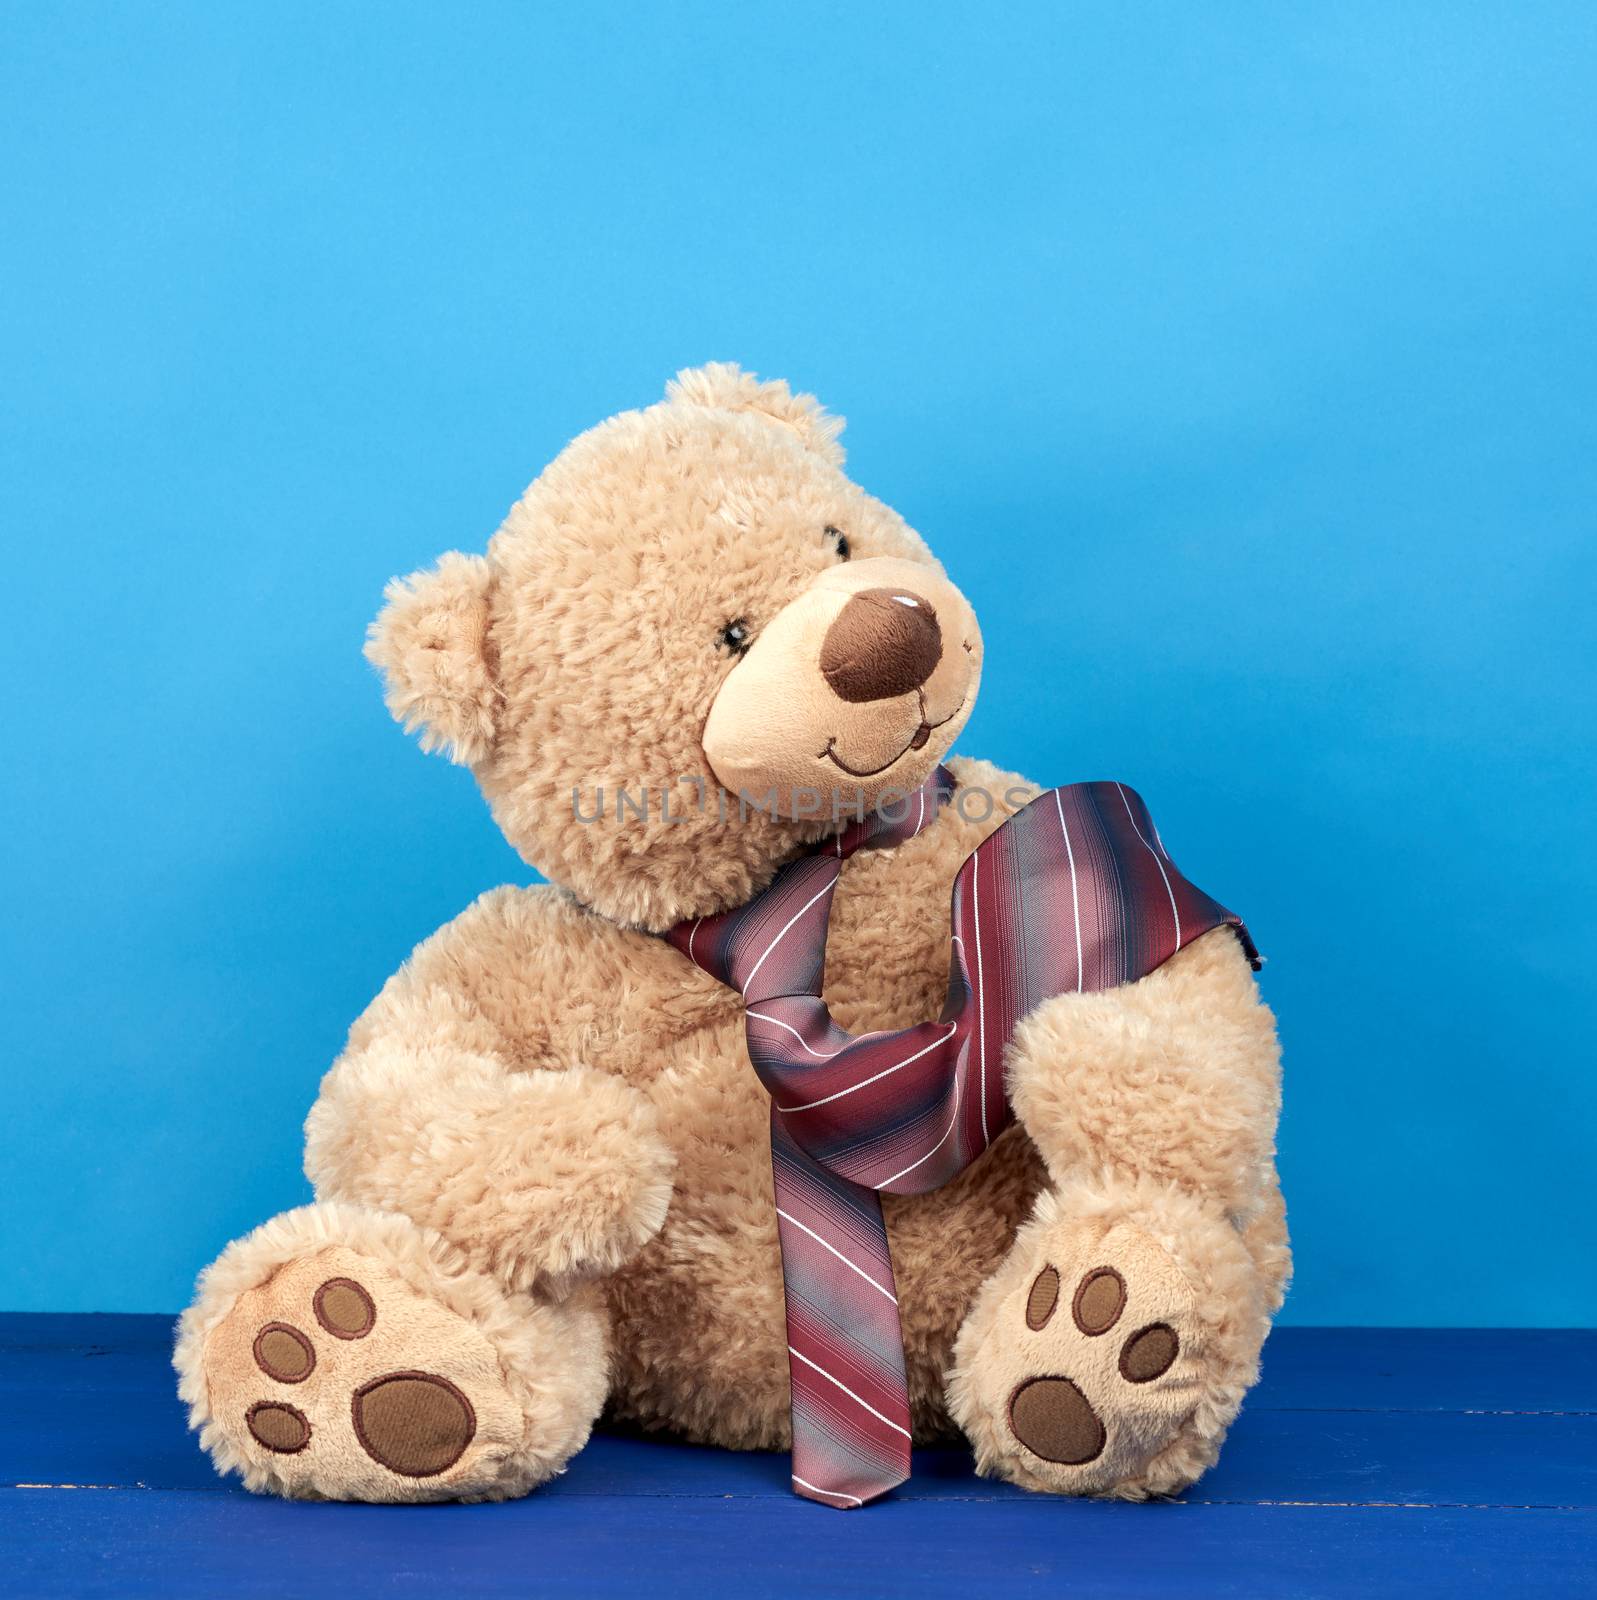 brown teddy bear sits on a blue wooden background, a tie is tied around his neck, dad bear